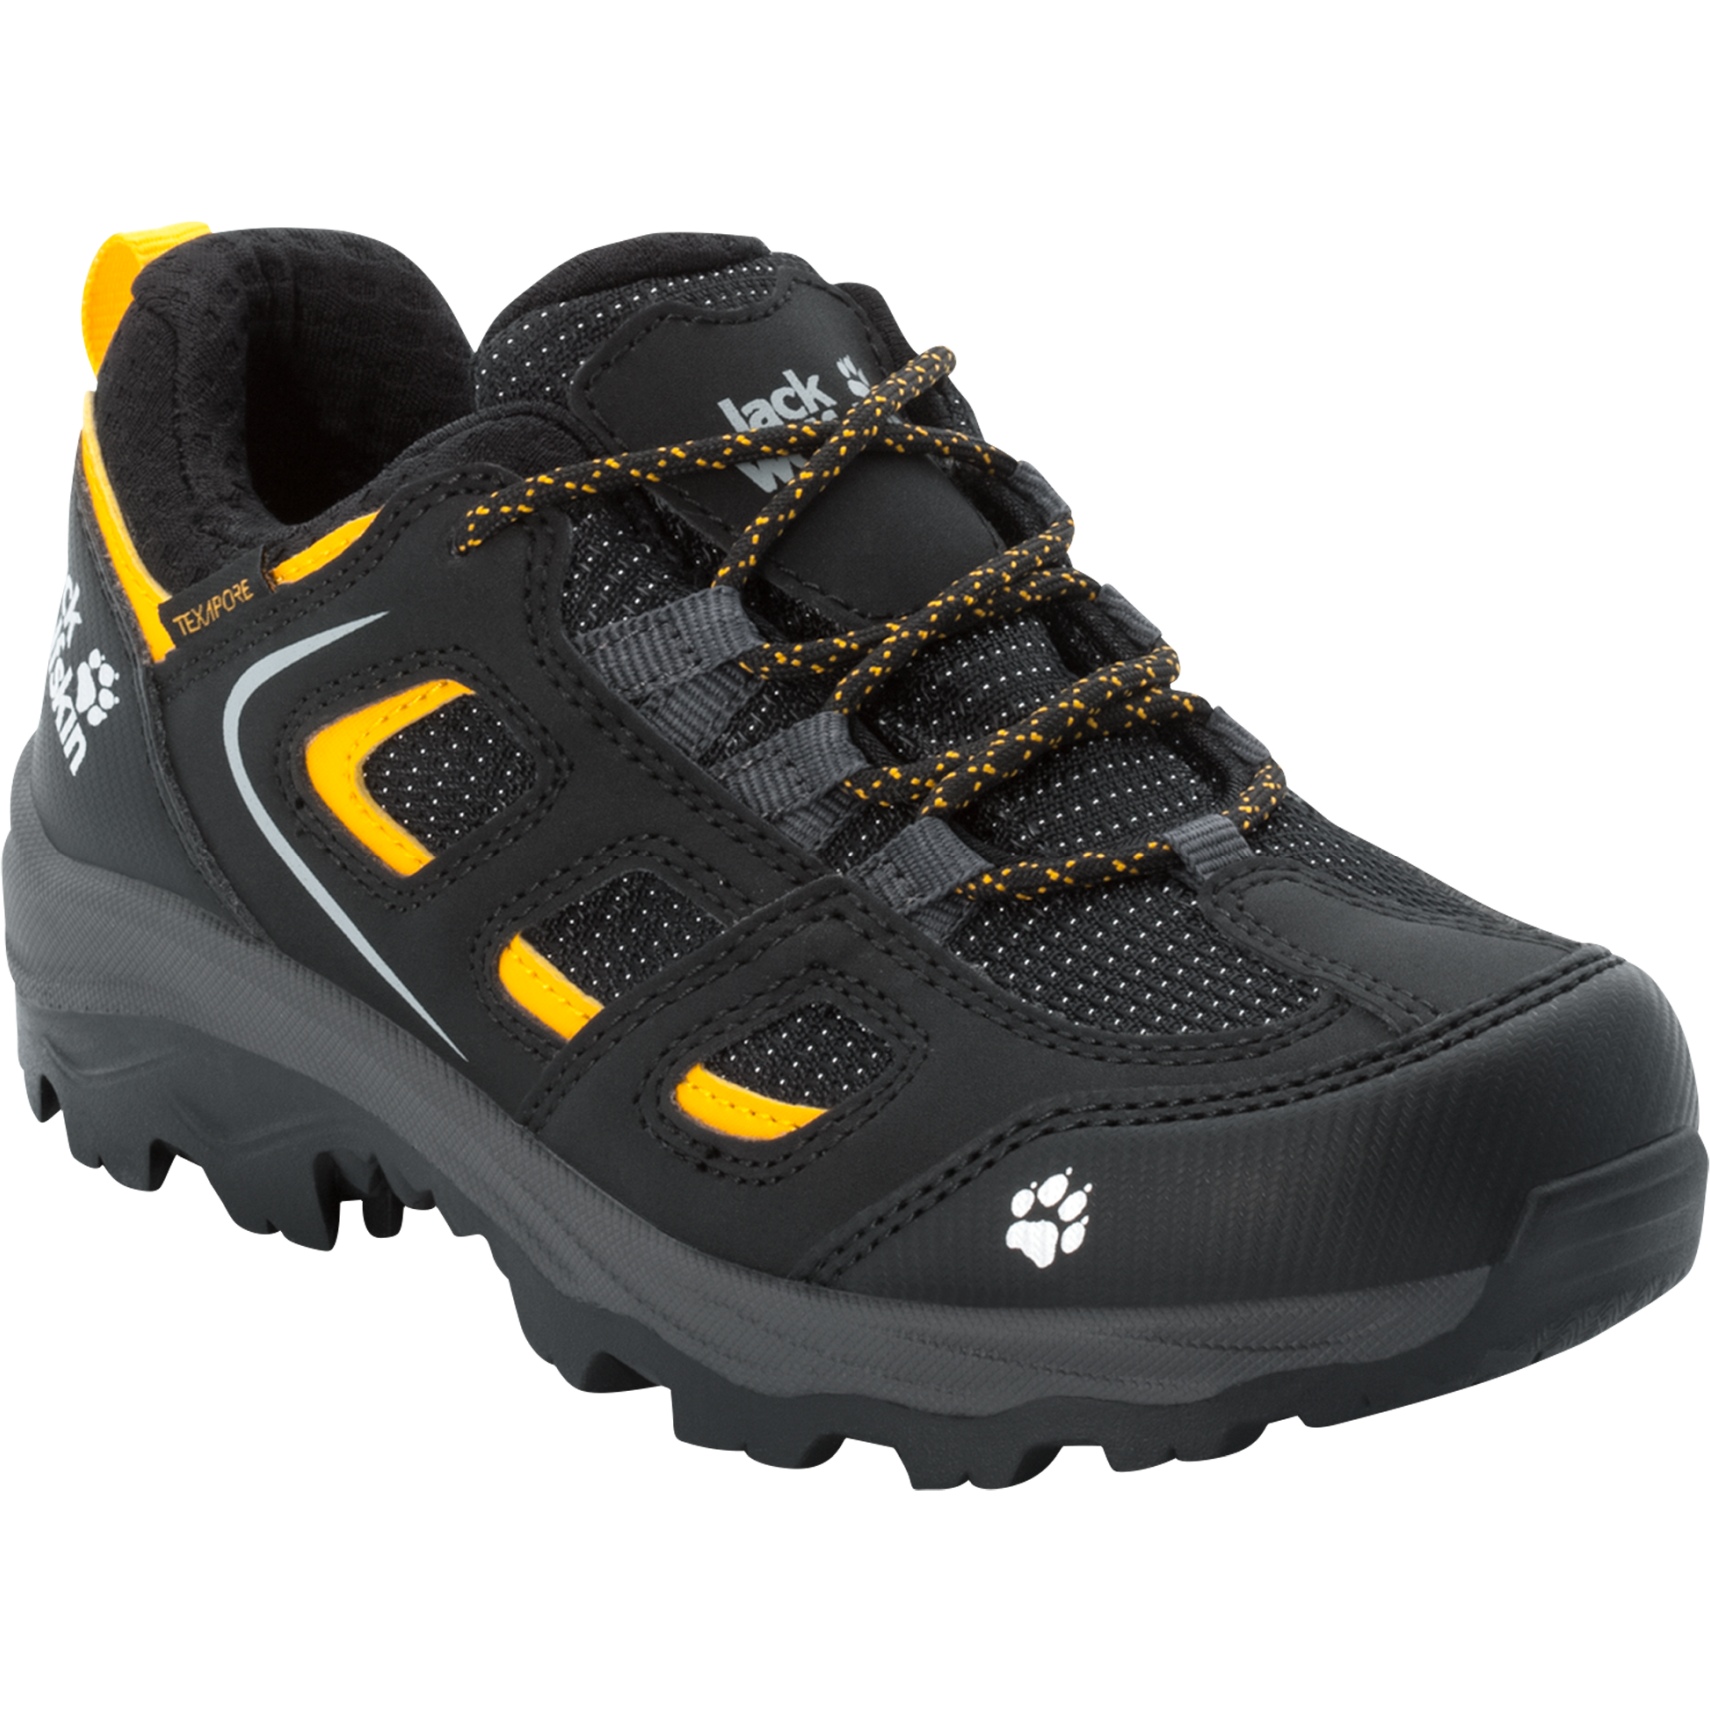 Picture of Jack Wolfskin Vojo Texapore Low Hiking Shoes Kids - black / burly yellow